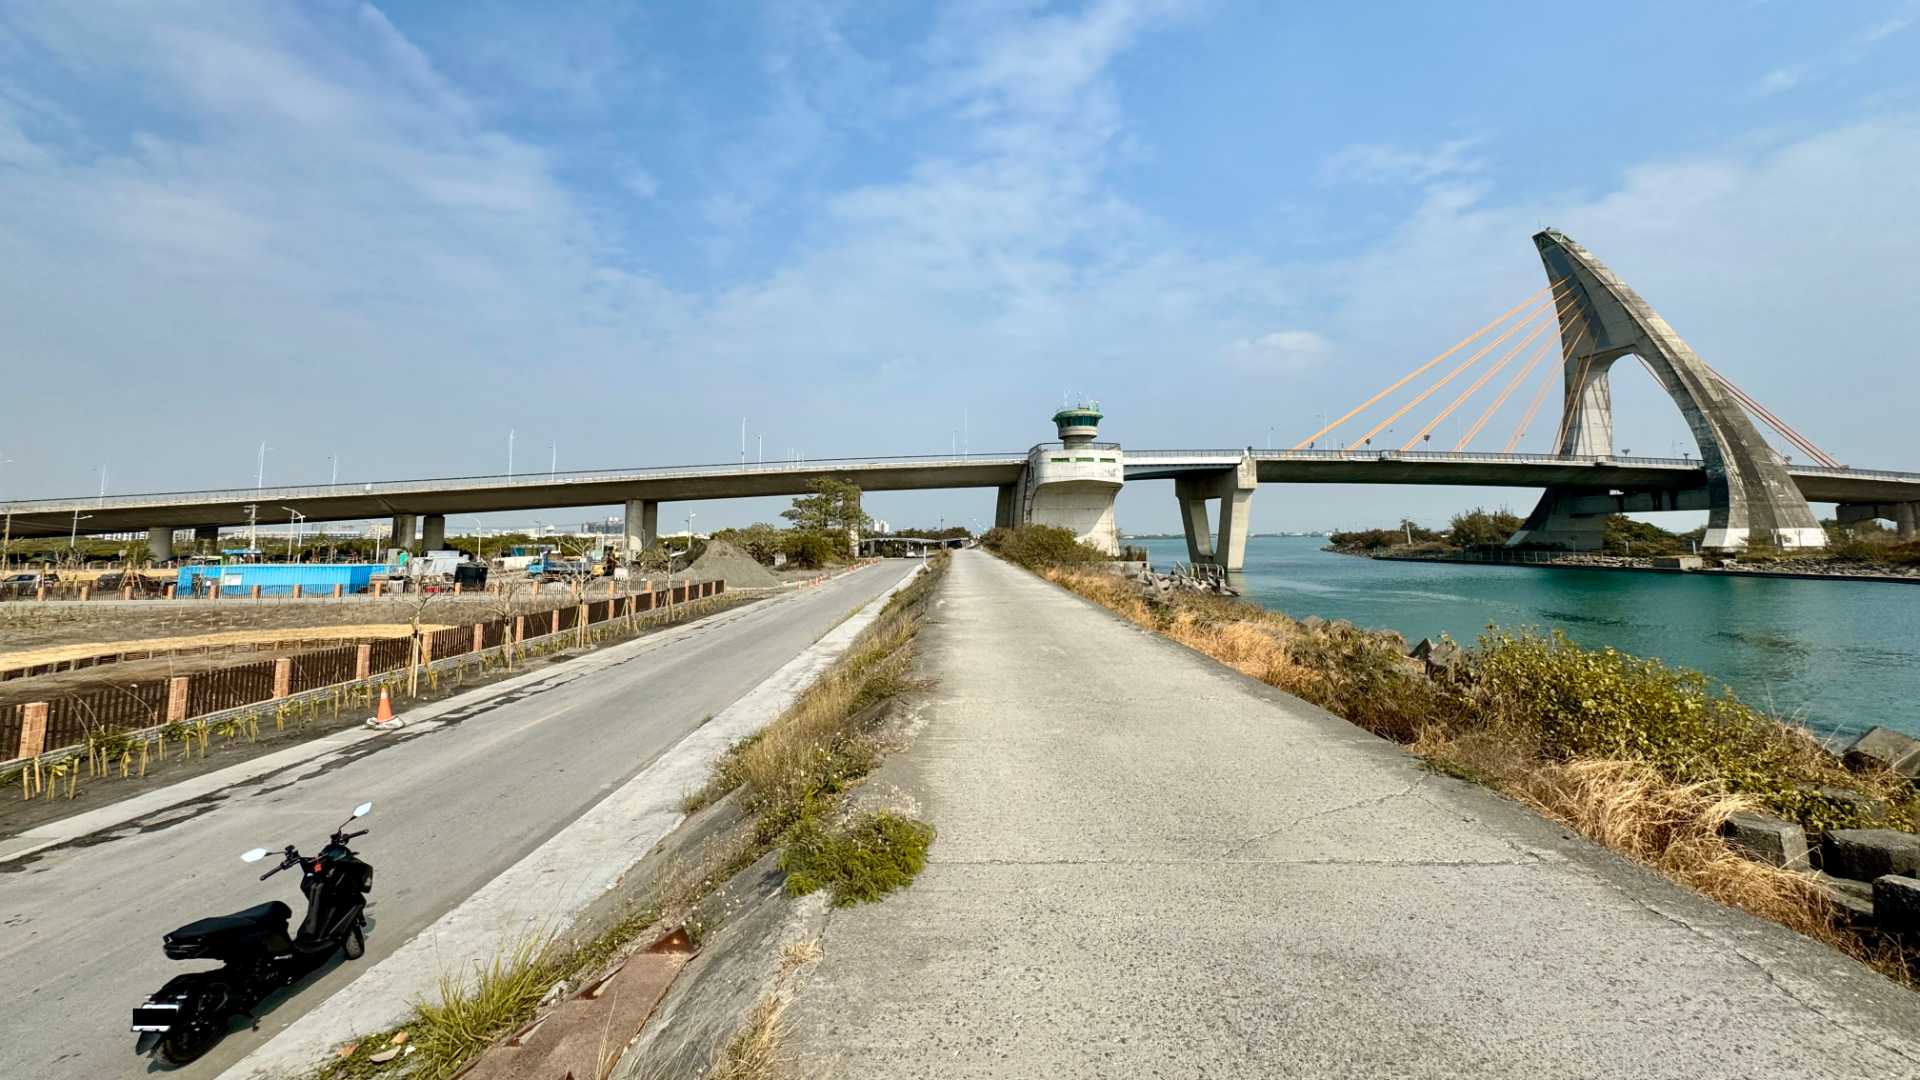 A scooter parked on a narrow road below Dapeng Bay Bridge. The bridge is in its lowered state.